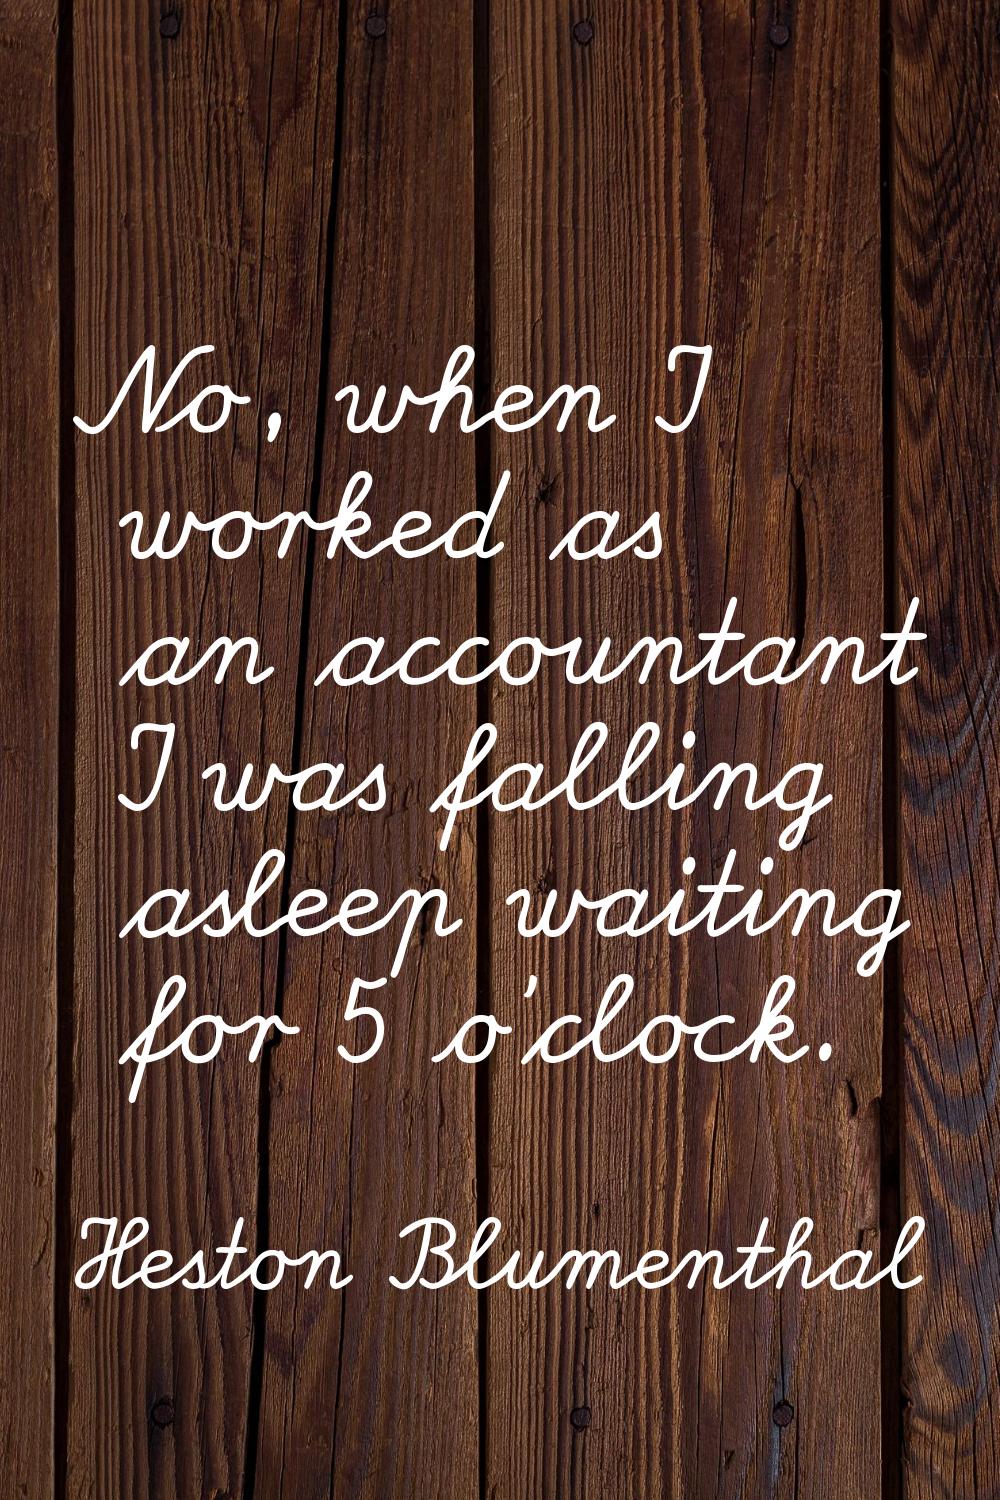 No, when I worked as an accountant I was falling asleep waiting for 5 o'clock.